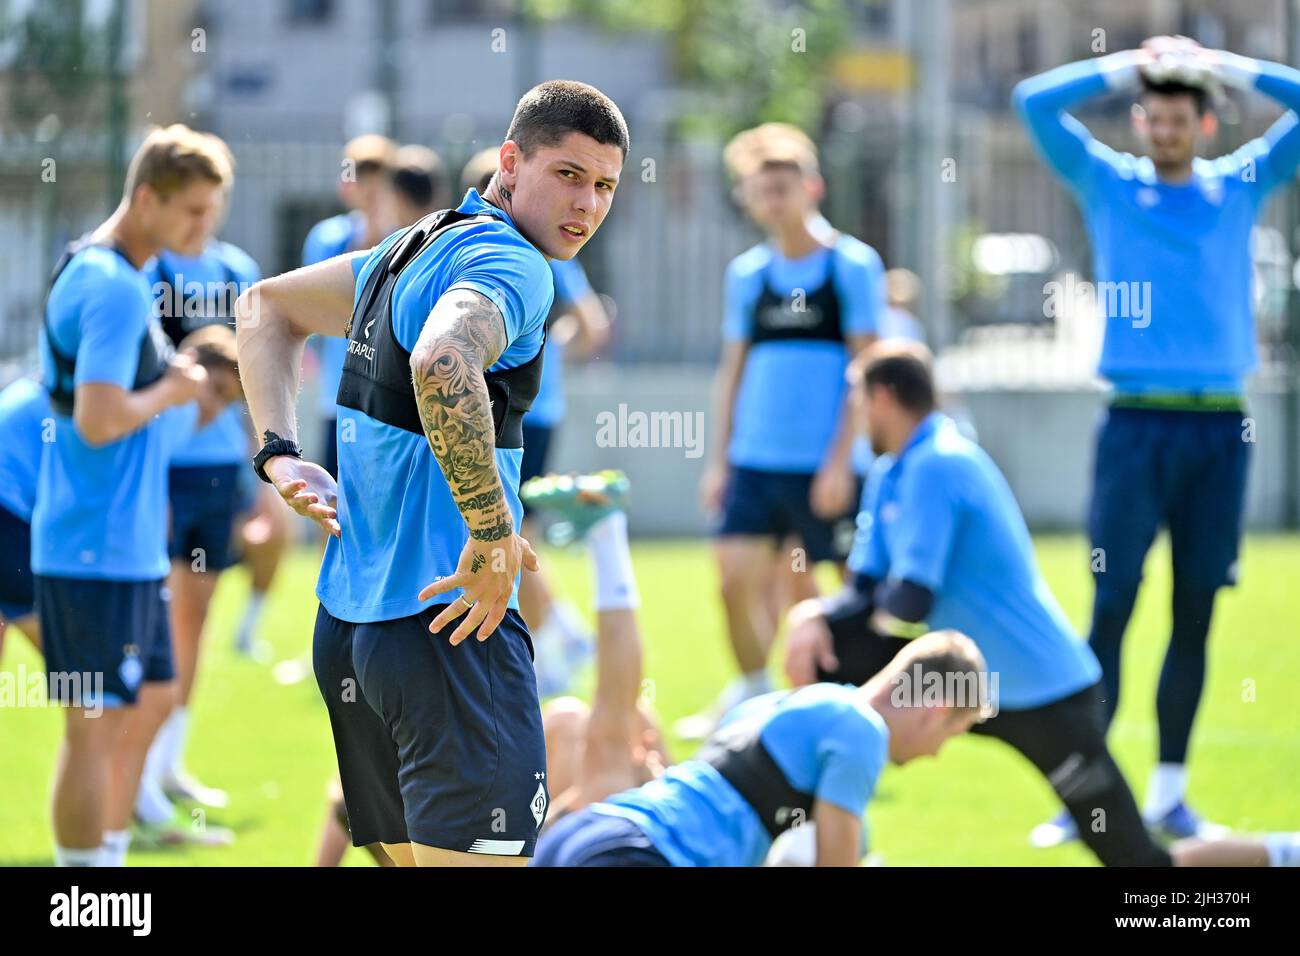 Brussels, Belgium. 14th July, 2022. Kyiv's Denys Popov pictured during a training session of Ukrainian soccer club FC Dynamo Kyiv, Thursday 14 July 2022 at the 'Petit Heyzel'/ 'Kleine Heizel', in Brussels. The City of Brussels makes the Kleine Heysel Stadium available to the football team so that they can train before playing their friendly match against Antwerp on Friday 15 July. They are in Brussels as part of their international tour 'Stop the War - Pray for Peace'. Credit: Belga News Agency/Alamy Live News Stock Photo